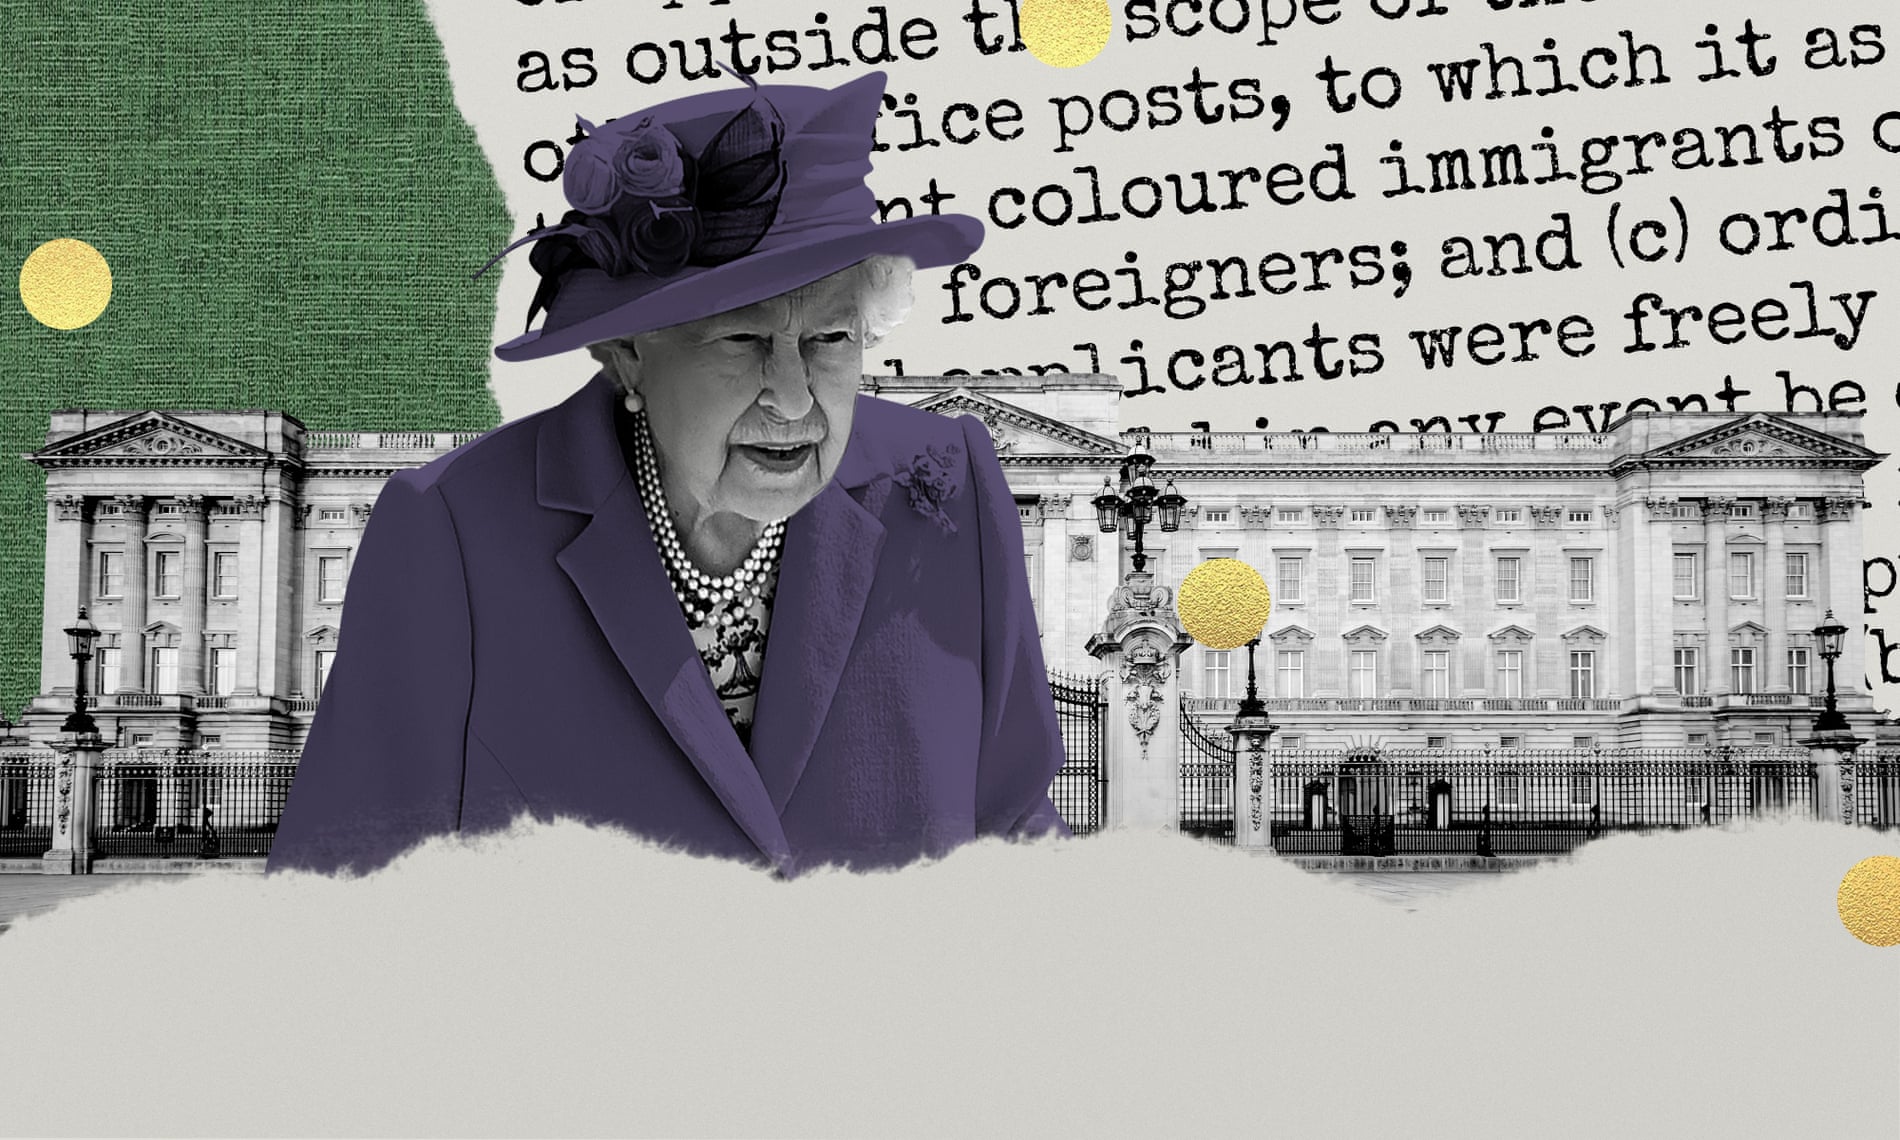 Illustration showing the Queen, Buckingham Palace and a document